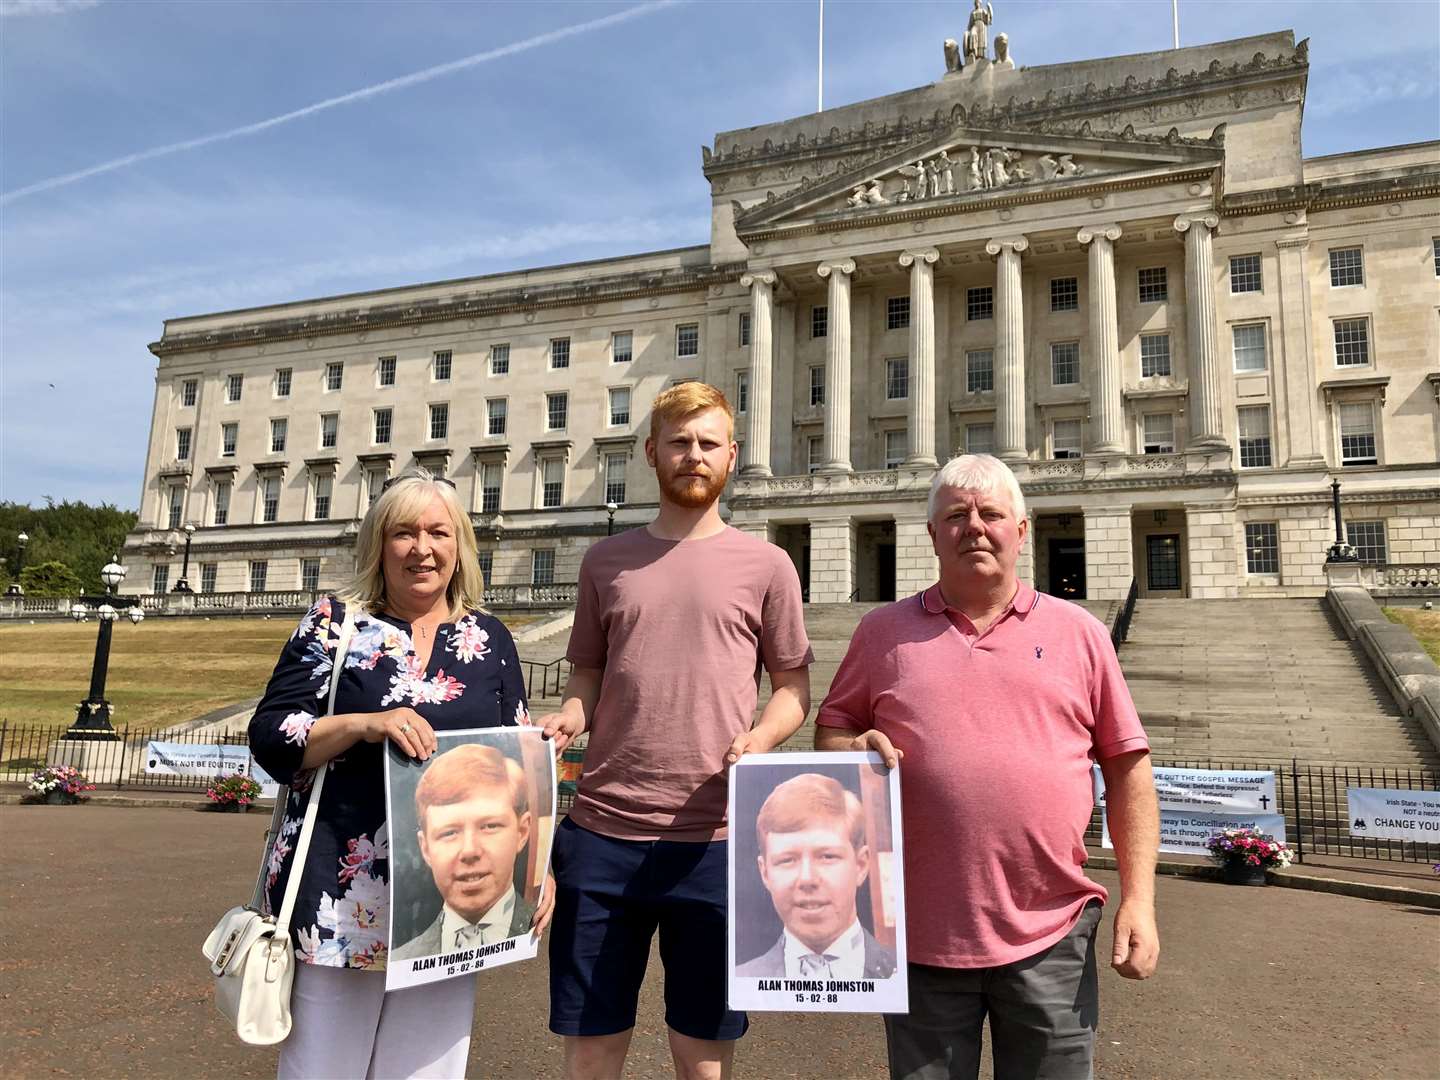 Sandra Harrison and Ian Johnston hold pictures of their murdered brother Alan Johnston. Joining them is Ian’s son who was named Alan after his uncle (David Young/PA)